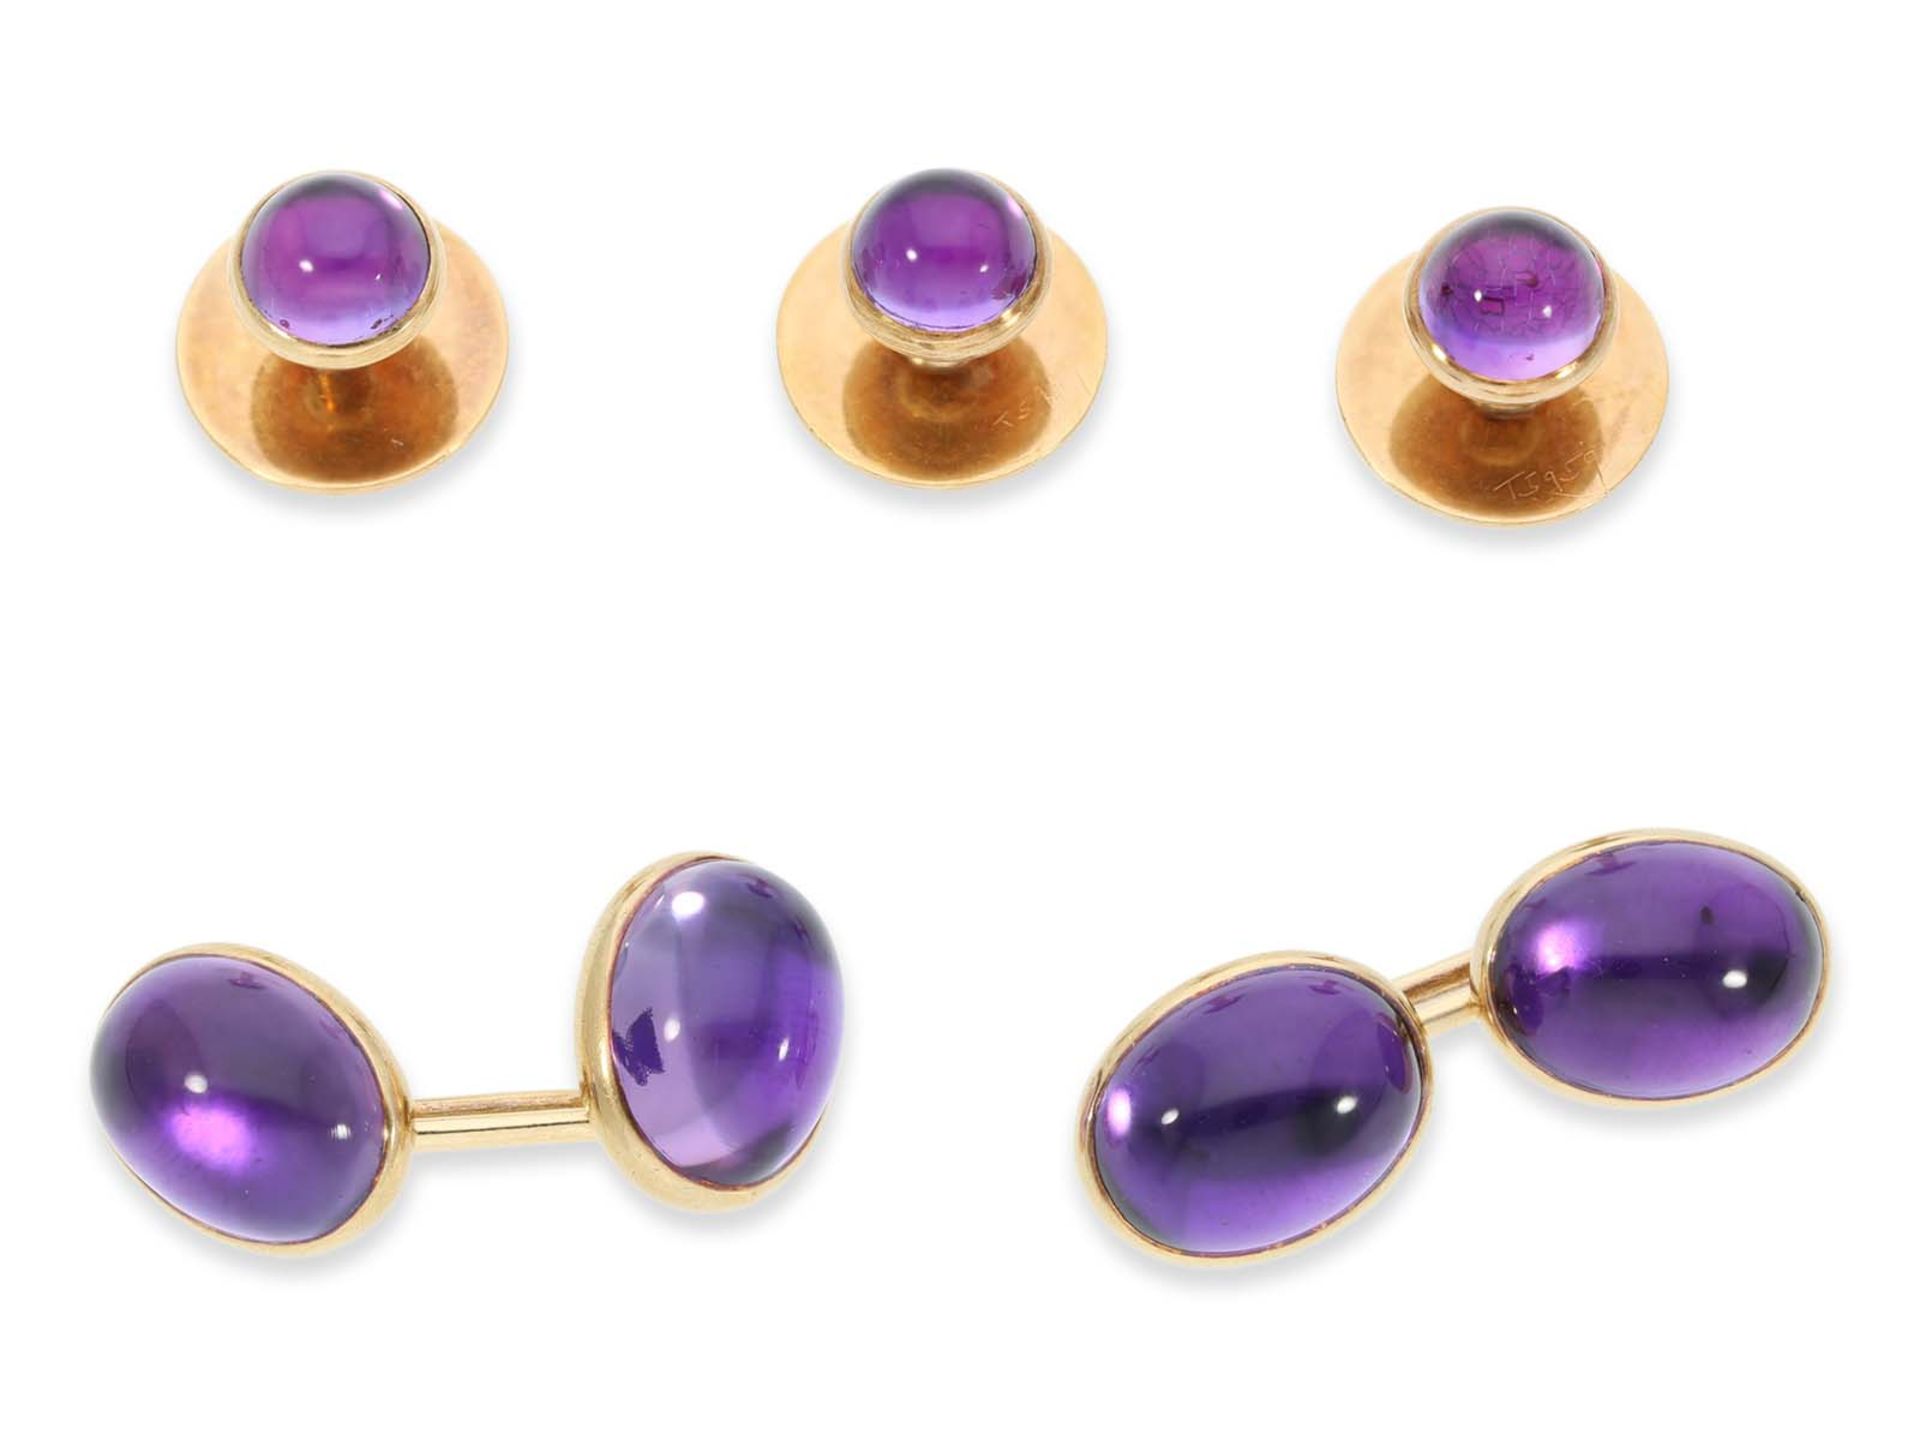 Cufflinks: handmade cufflinks and tailcoats with amethyst cabochons, 14K gold - Image 5 of 5